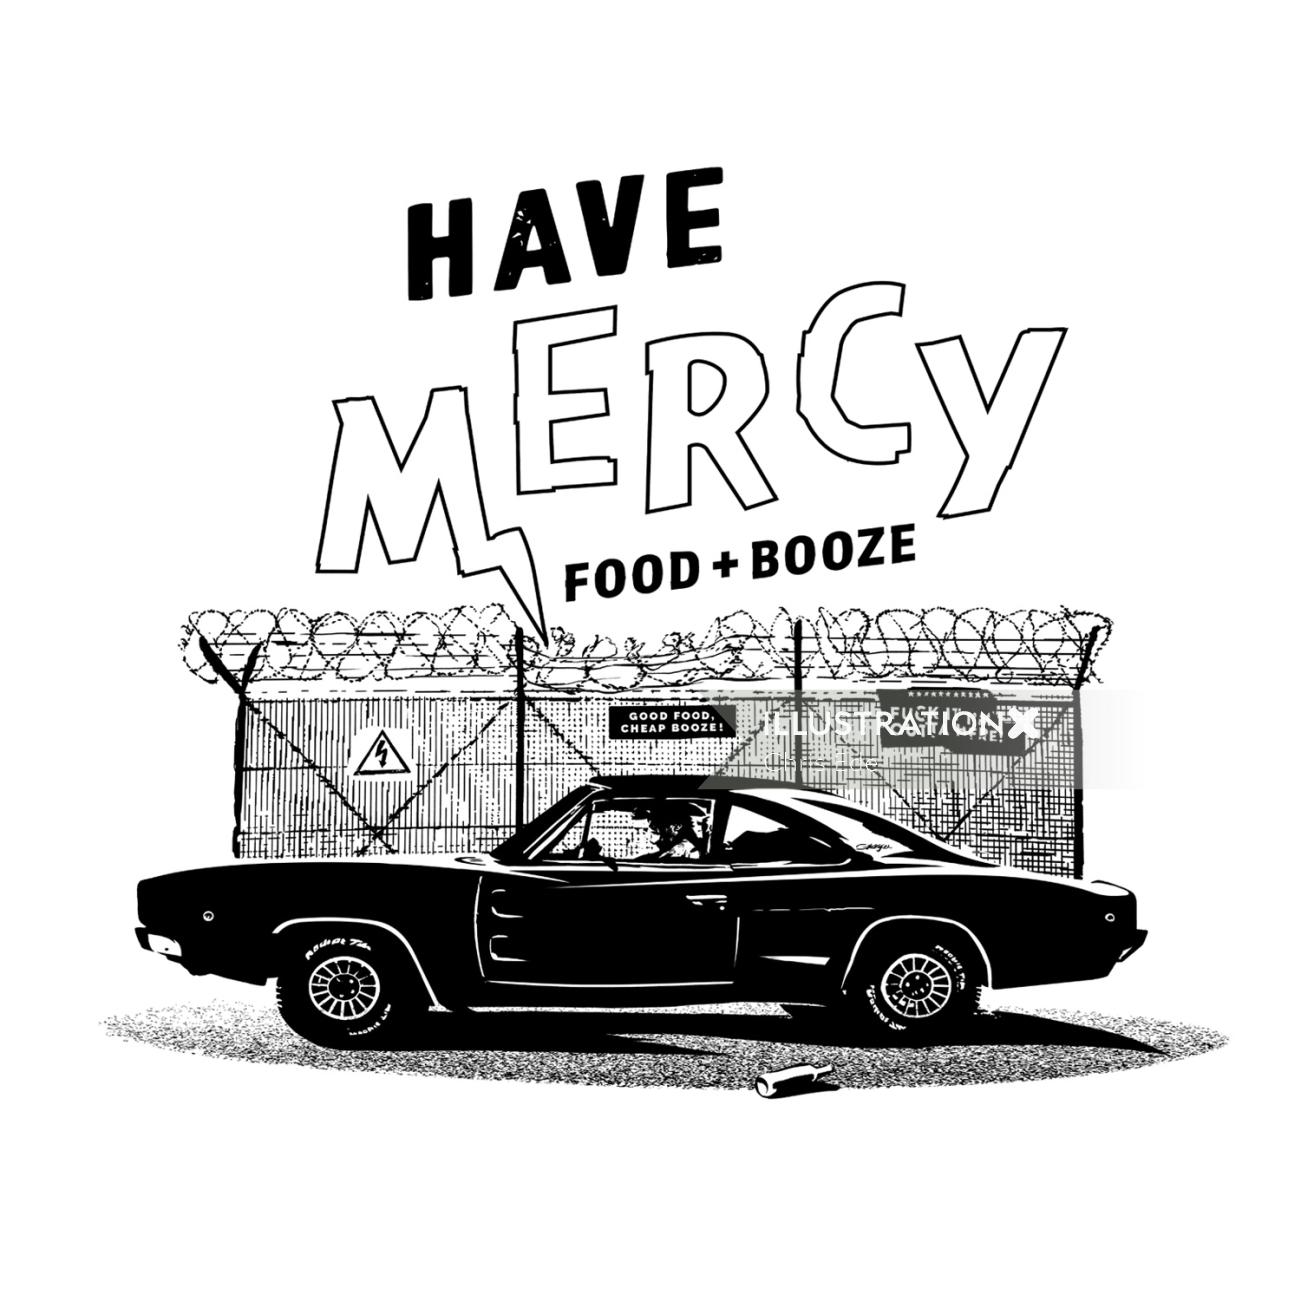 Black and white Michael Madsen x Have Mercy poster
